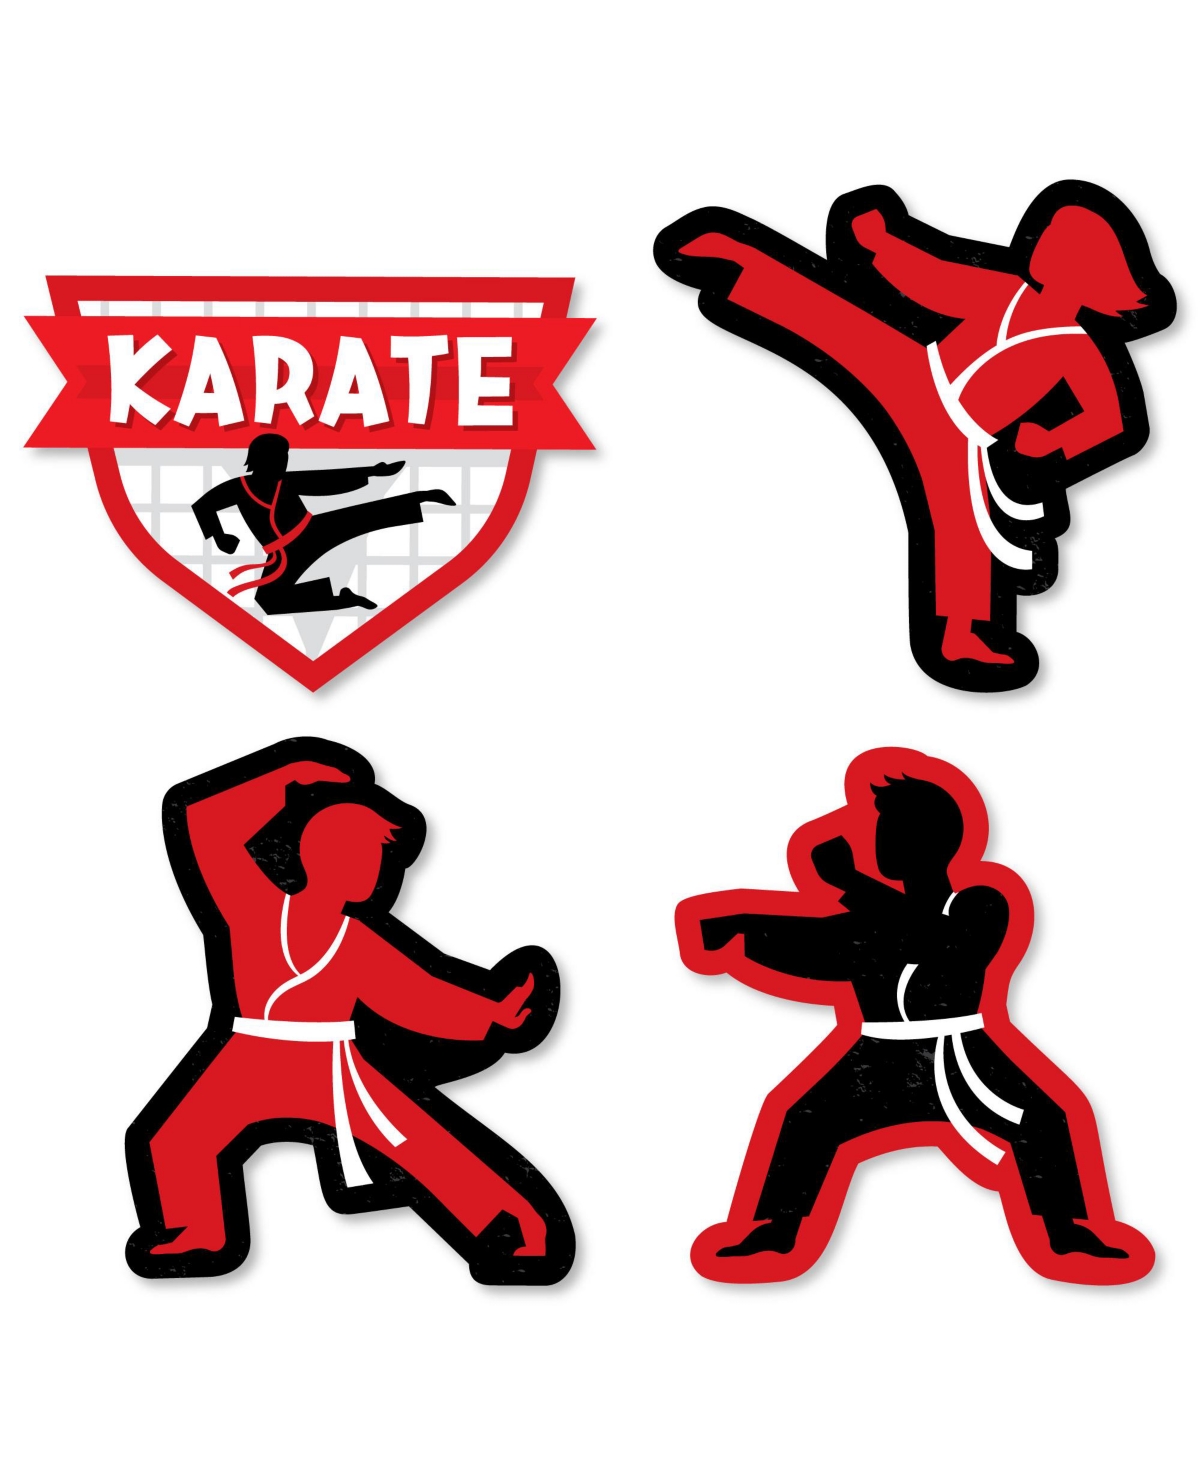 Karate Master - Diy Shaped Martial Arts Birthday Party Cut-Outs - 24 Count